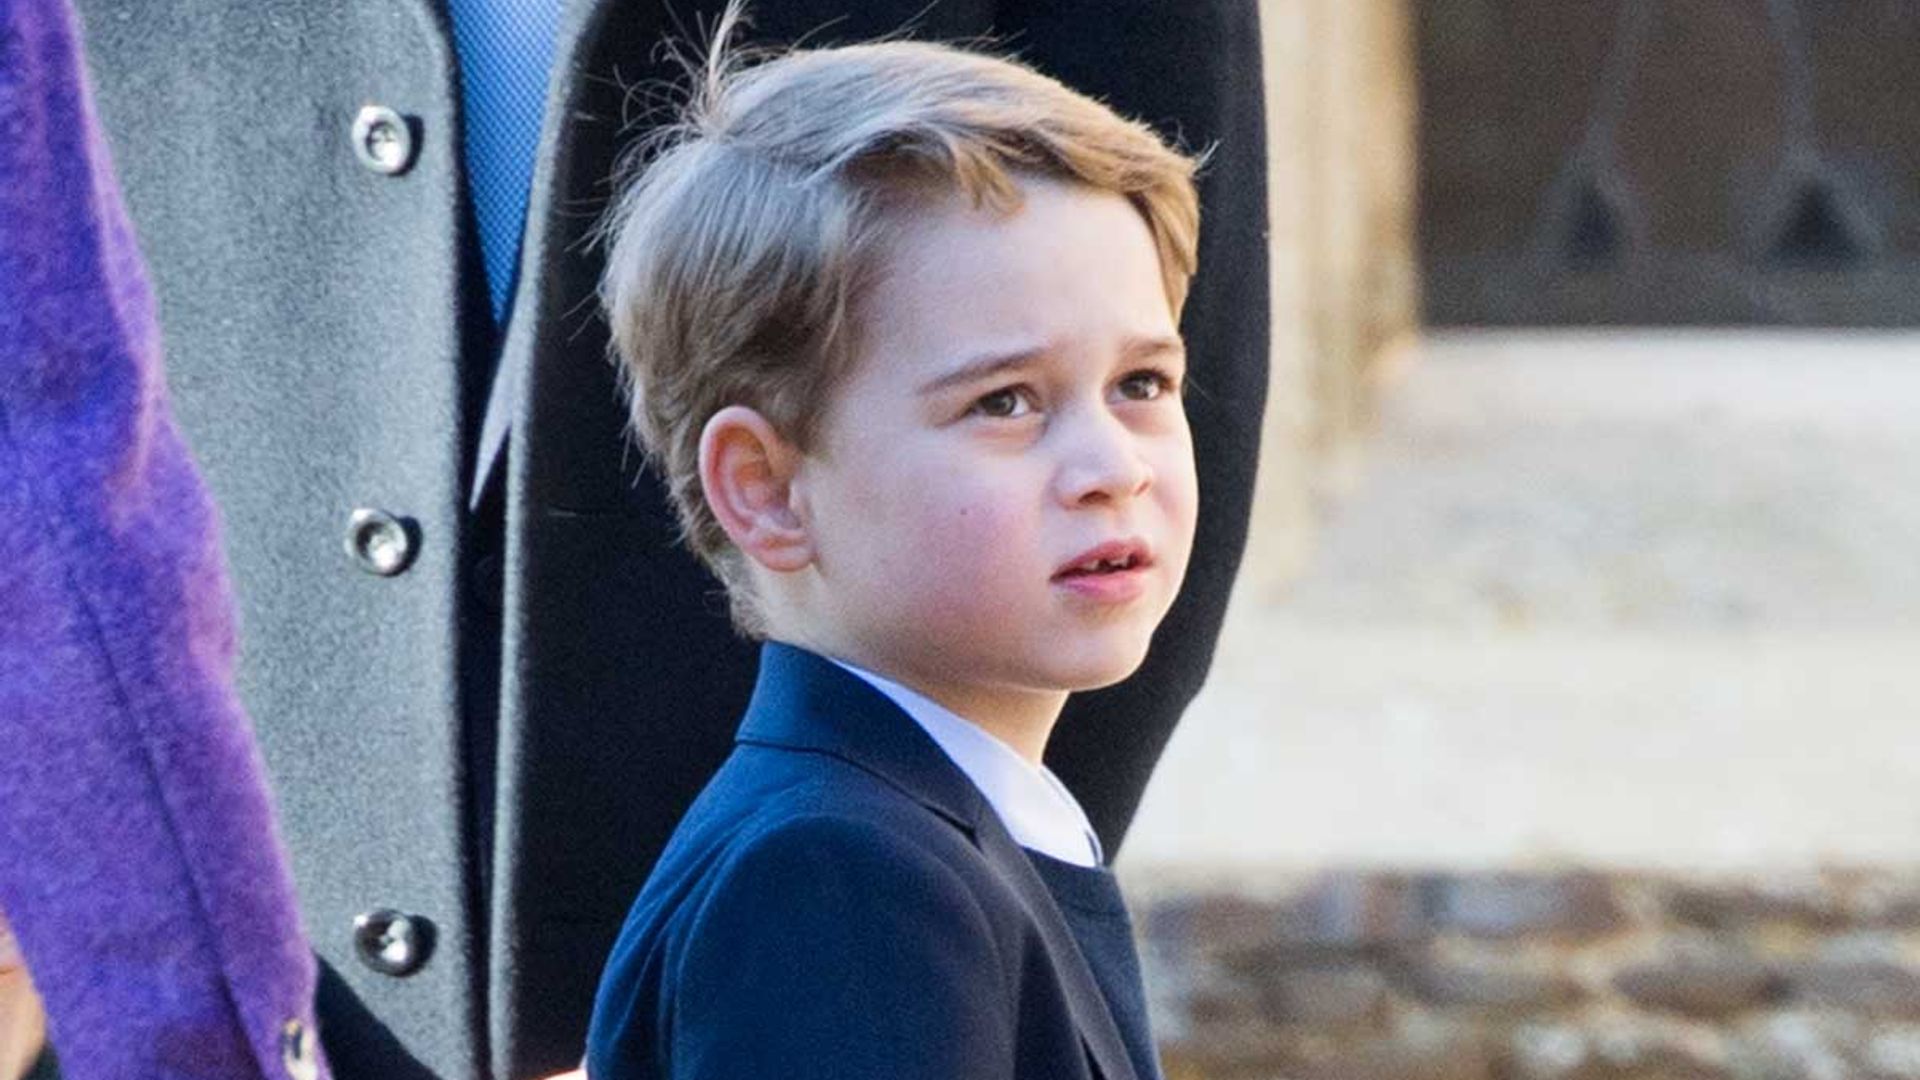 Prince George looks so grown up as he poses for new photo with the Queen, P...